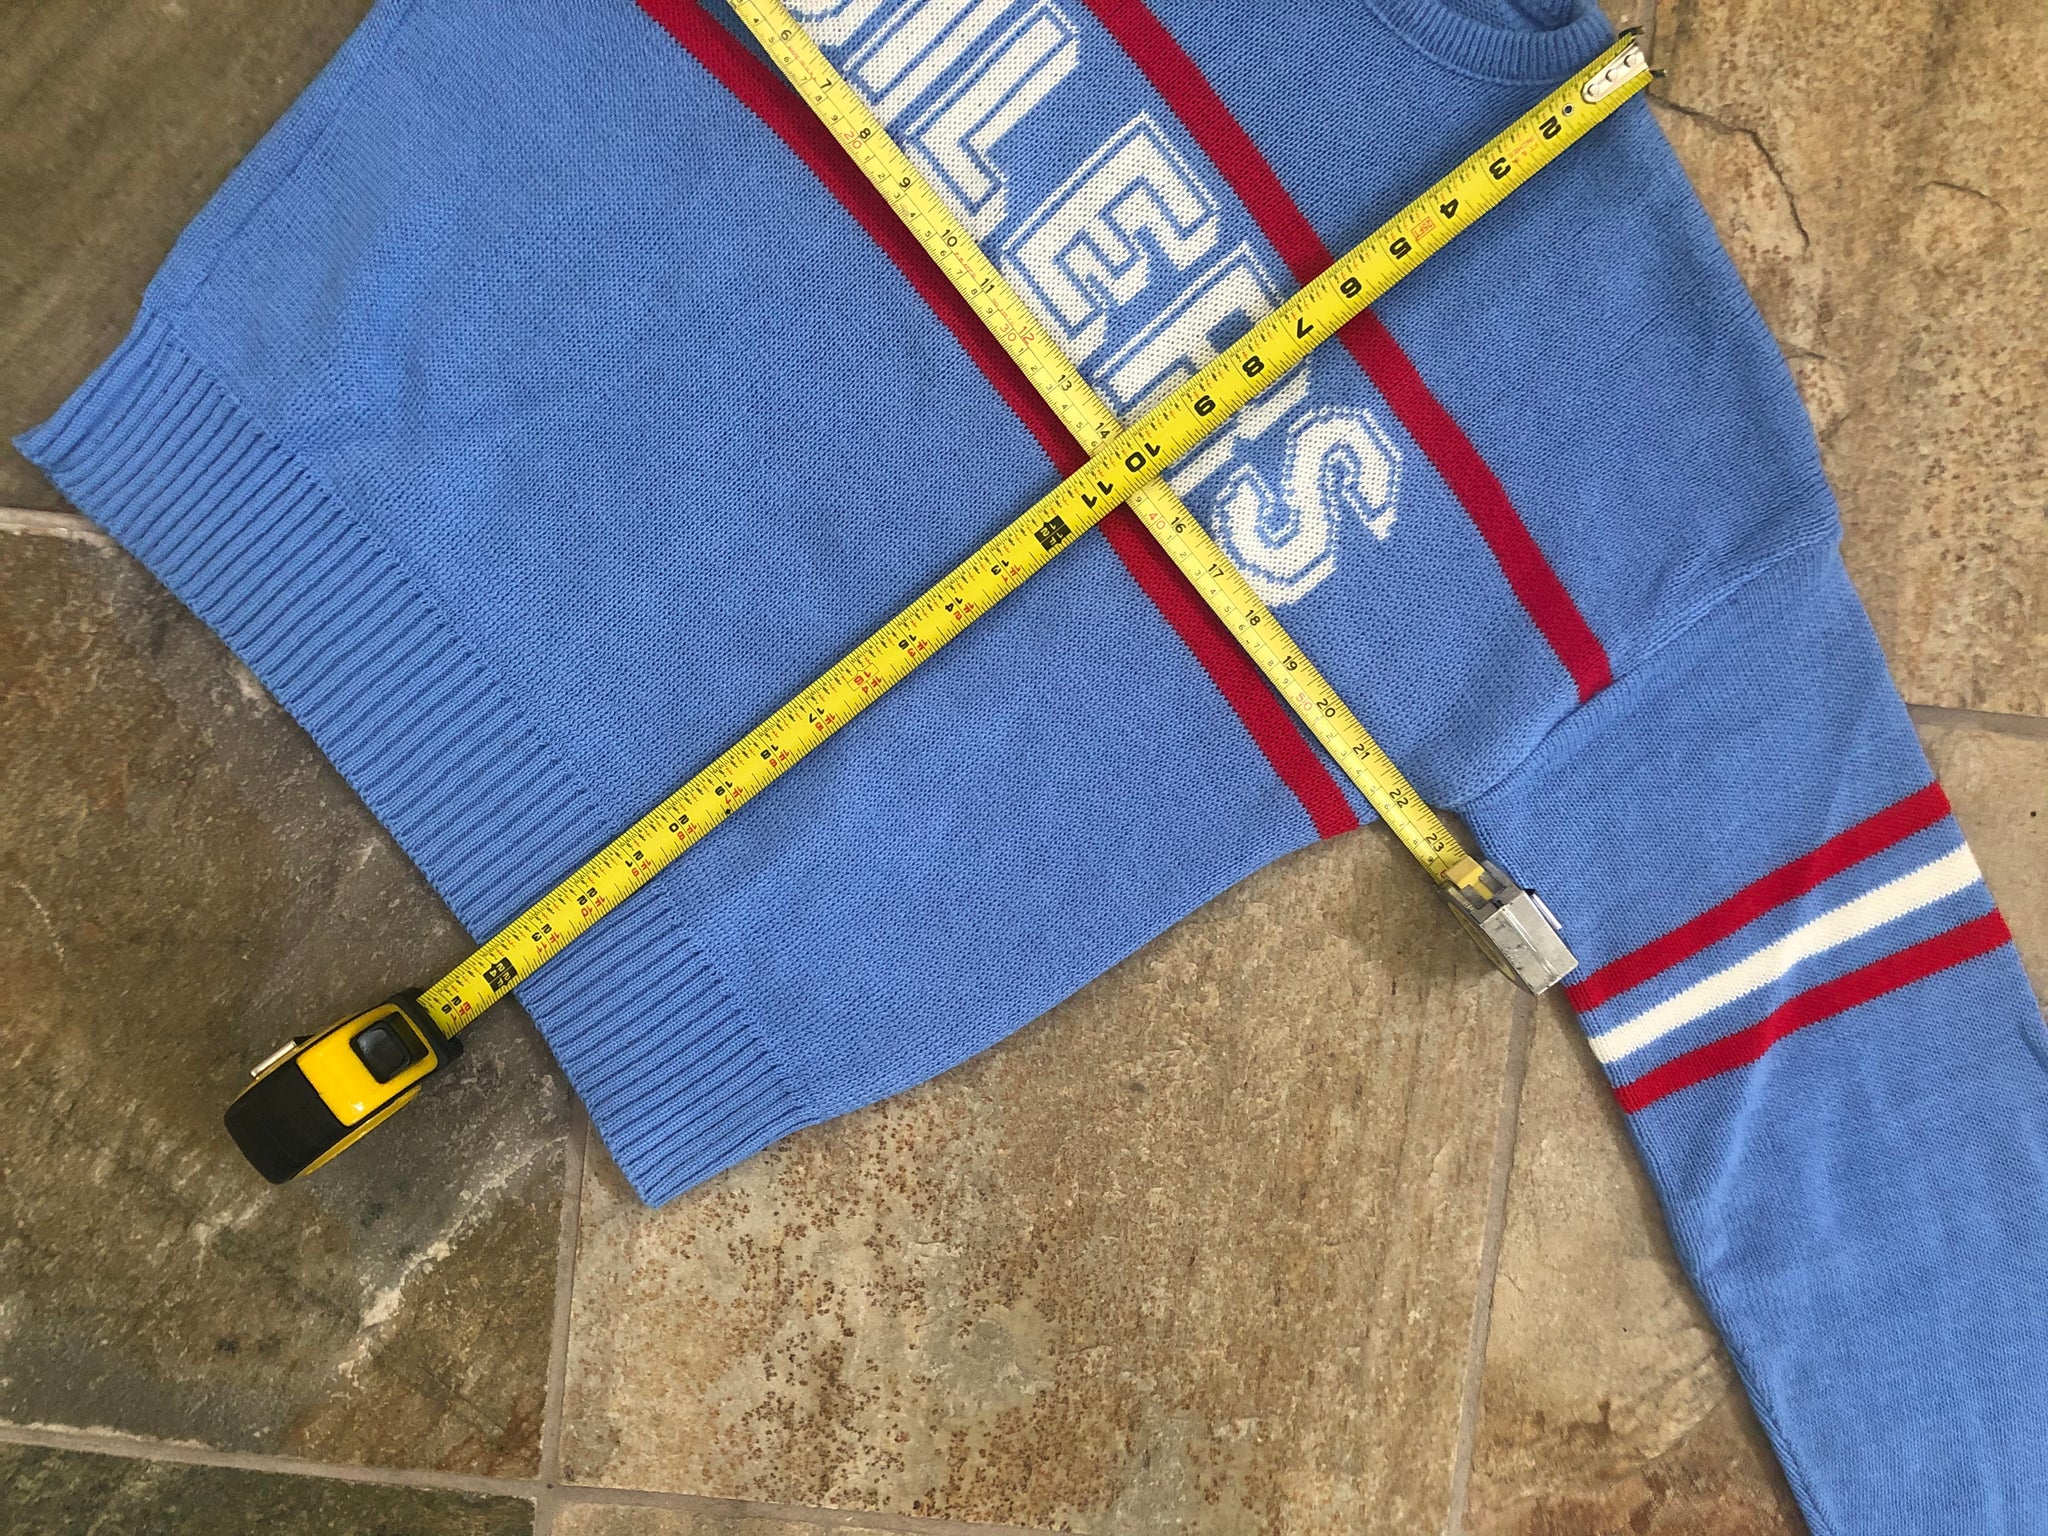 buy cheap online RARE VINTAGE Houston Oilers Cliff Engle Sweater NFL  Football 1980s XL NEW! 